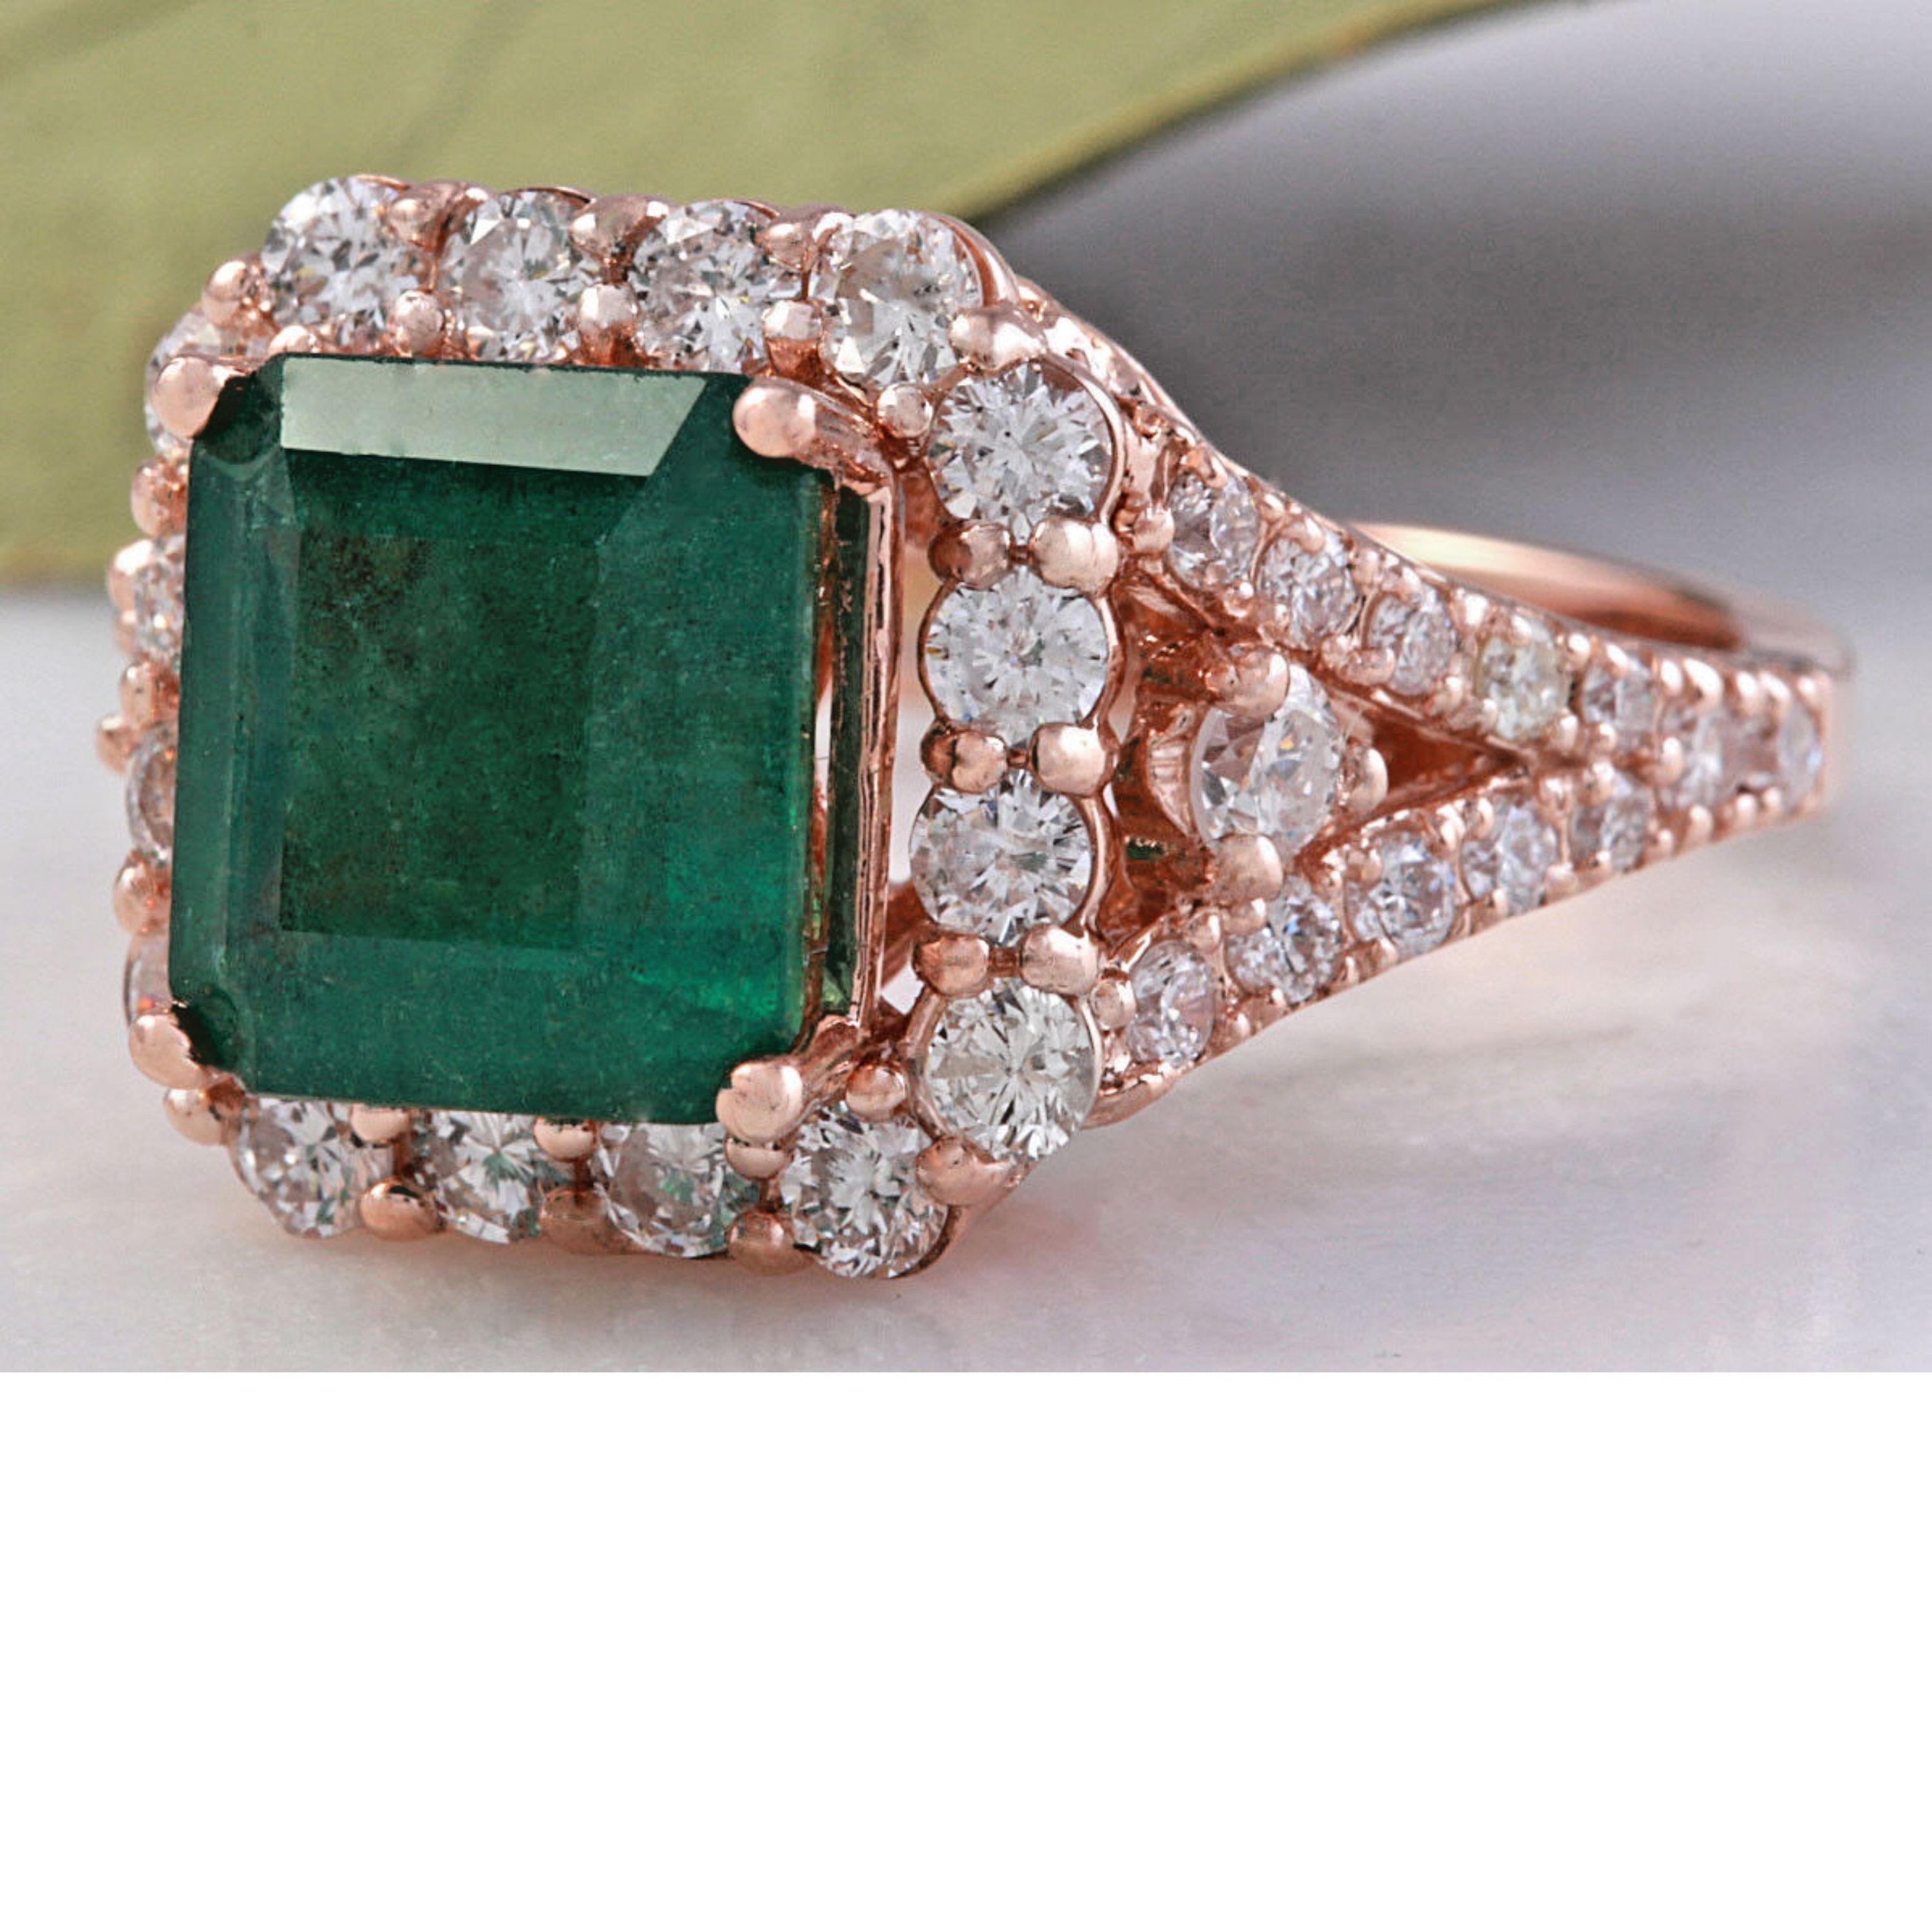 5.20 Carats Natural Emerald and Diamond 14K Solid Rose Gold Ring

Total Natural Green Emerald Weight is: Approx. 4.00 Carats (transparent)

Emerald Measures: Approx. 9 x 9mm

Emerald Treatment: Oiling

Natural Round Diamonds Weight: Approx. 1.20